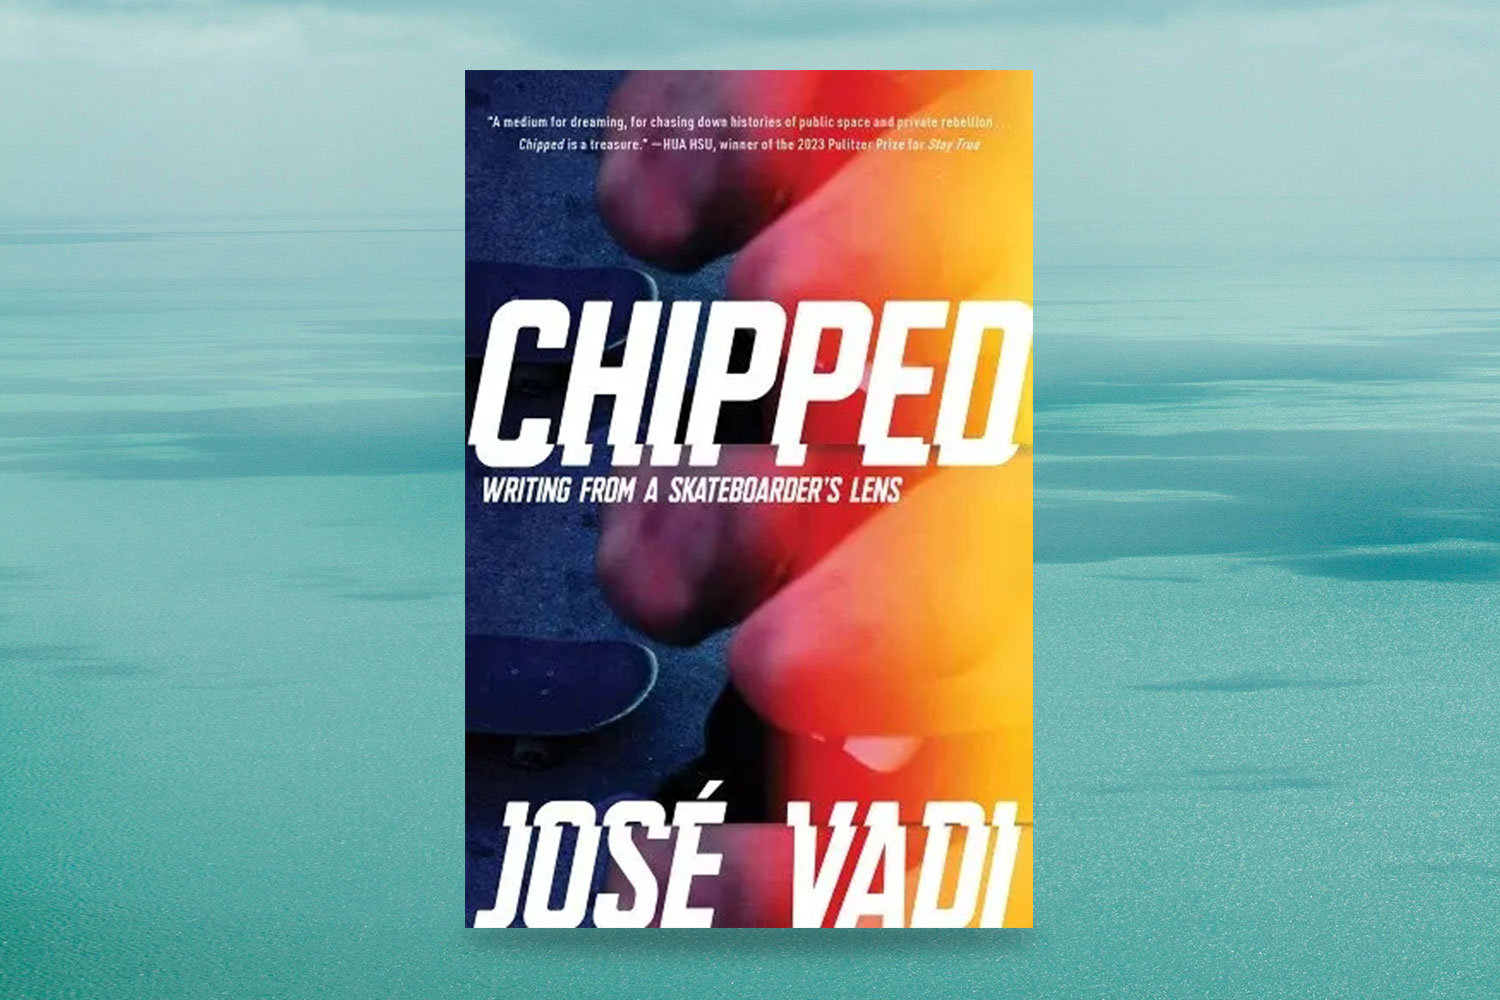 José Vadi, Chipped: Writing from a Skateboarder's Lens 